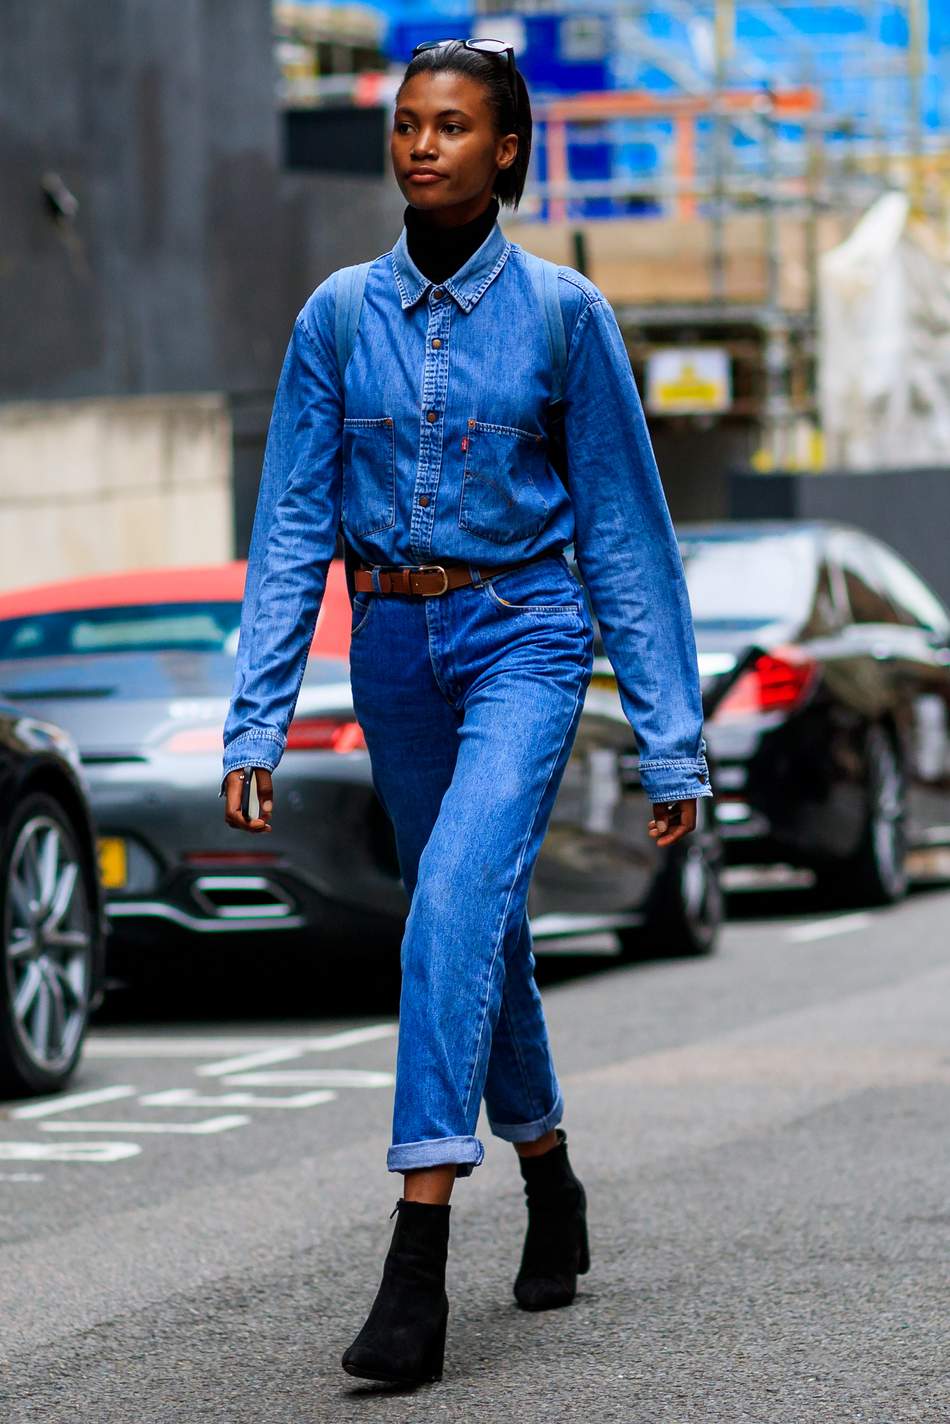 Double Denim Fashion Trend. (The New Rules Of Double Denim) FASHION ...